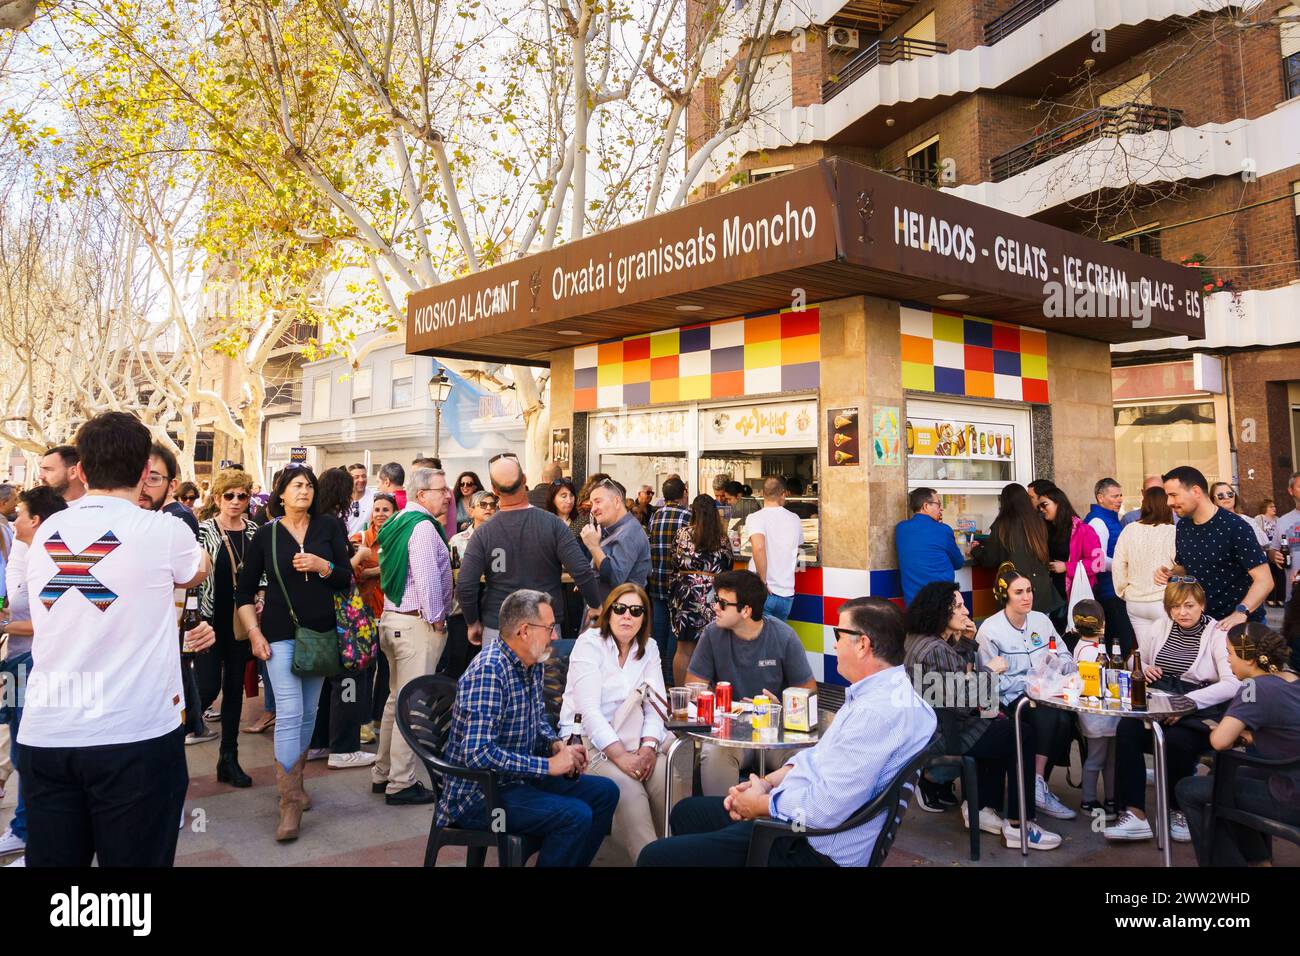 Crowds come to celebrate Las Fallas in celebration of St Joseph's day at an outdoor cafe in the Valencian town of Oliva, Spain Stock Photo